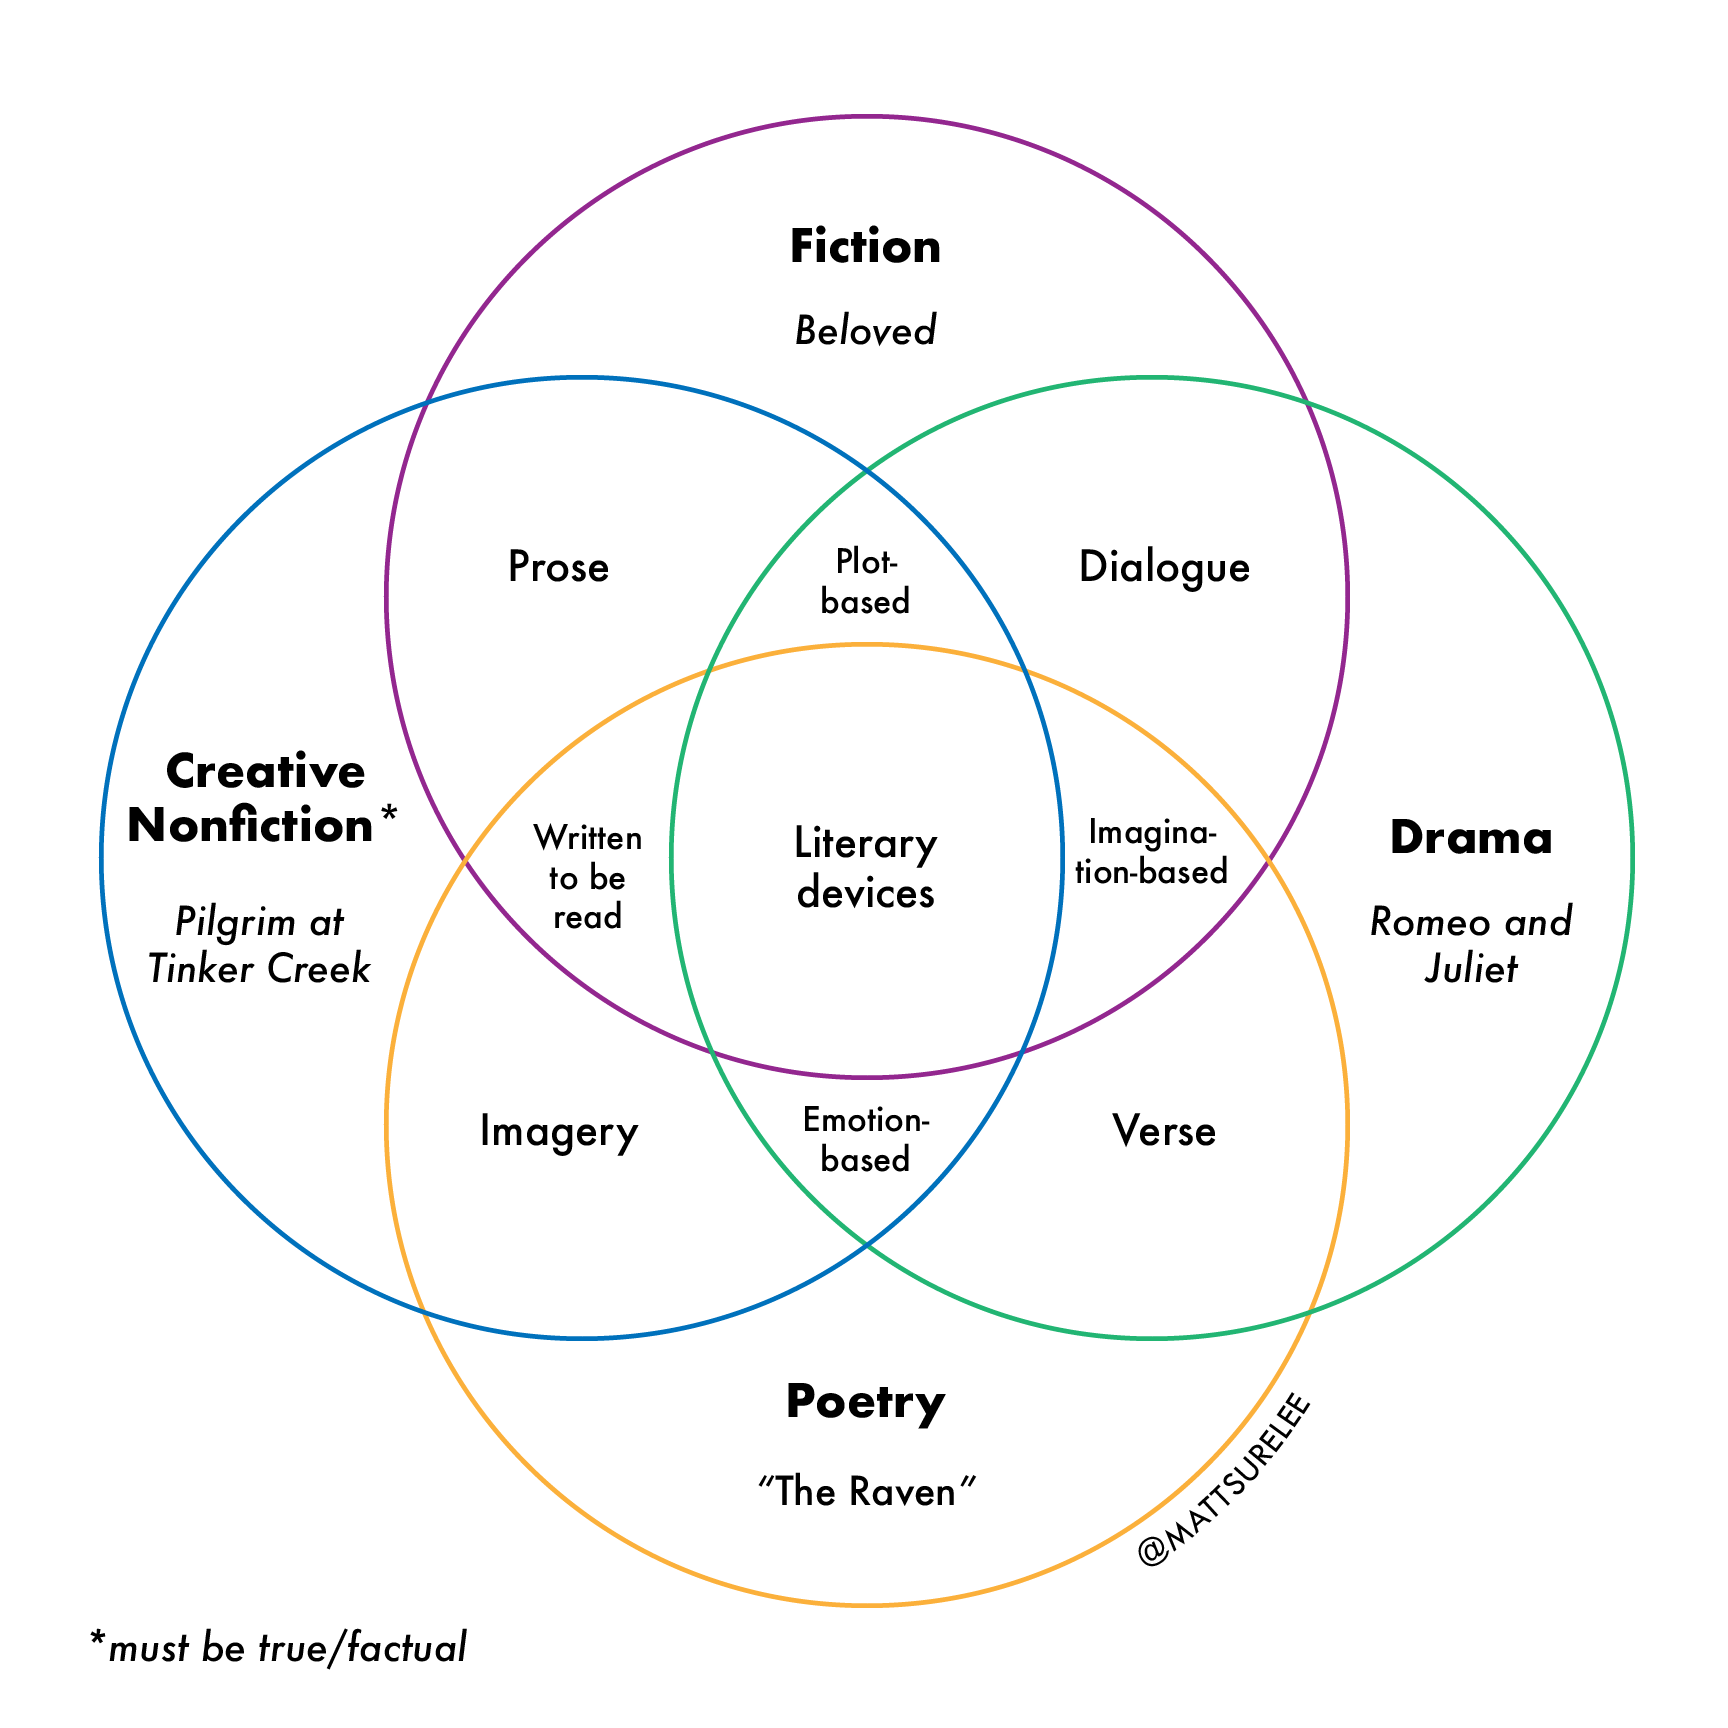 This Venn Diagram depicts the uniqueness and overlap of the four major literary genres. Creative Nonfiction is in a blue circle with Pilgrim at Tinker Creek as a classic example. To fall into this category, the content of the text must be true/factual. It is usually written in prose, plot-based, written to be read rather than spoken aloud (although it can be!), and emphasizes imagery. It can also be emotion-based, and it contains literary devices. The Fiction circle is purple, an example is Beloved, and overlaps with Creative Nonfiction in that it is usually written in prose, plot-based, contains literary devices, is written to be read (rather than spoken aloud, although it can be).  Fiction contains dialogue and is imagination based. The major difference between Fiction and Nonfiction is that Nonfiction must be true/factual. Drama is in a green and the example is Romeo and Juliet. Drama emphasizes dialogue, plot, imagination, and is often written in verse. Written to be performed. Poetry, example as “The Raven,” is often written in verse, emotion-based, contains imagery, written to be read and written to be performed. The main overlap between all genres is literary devices.